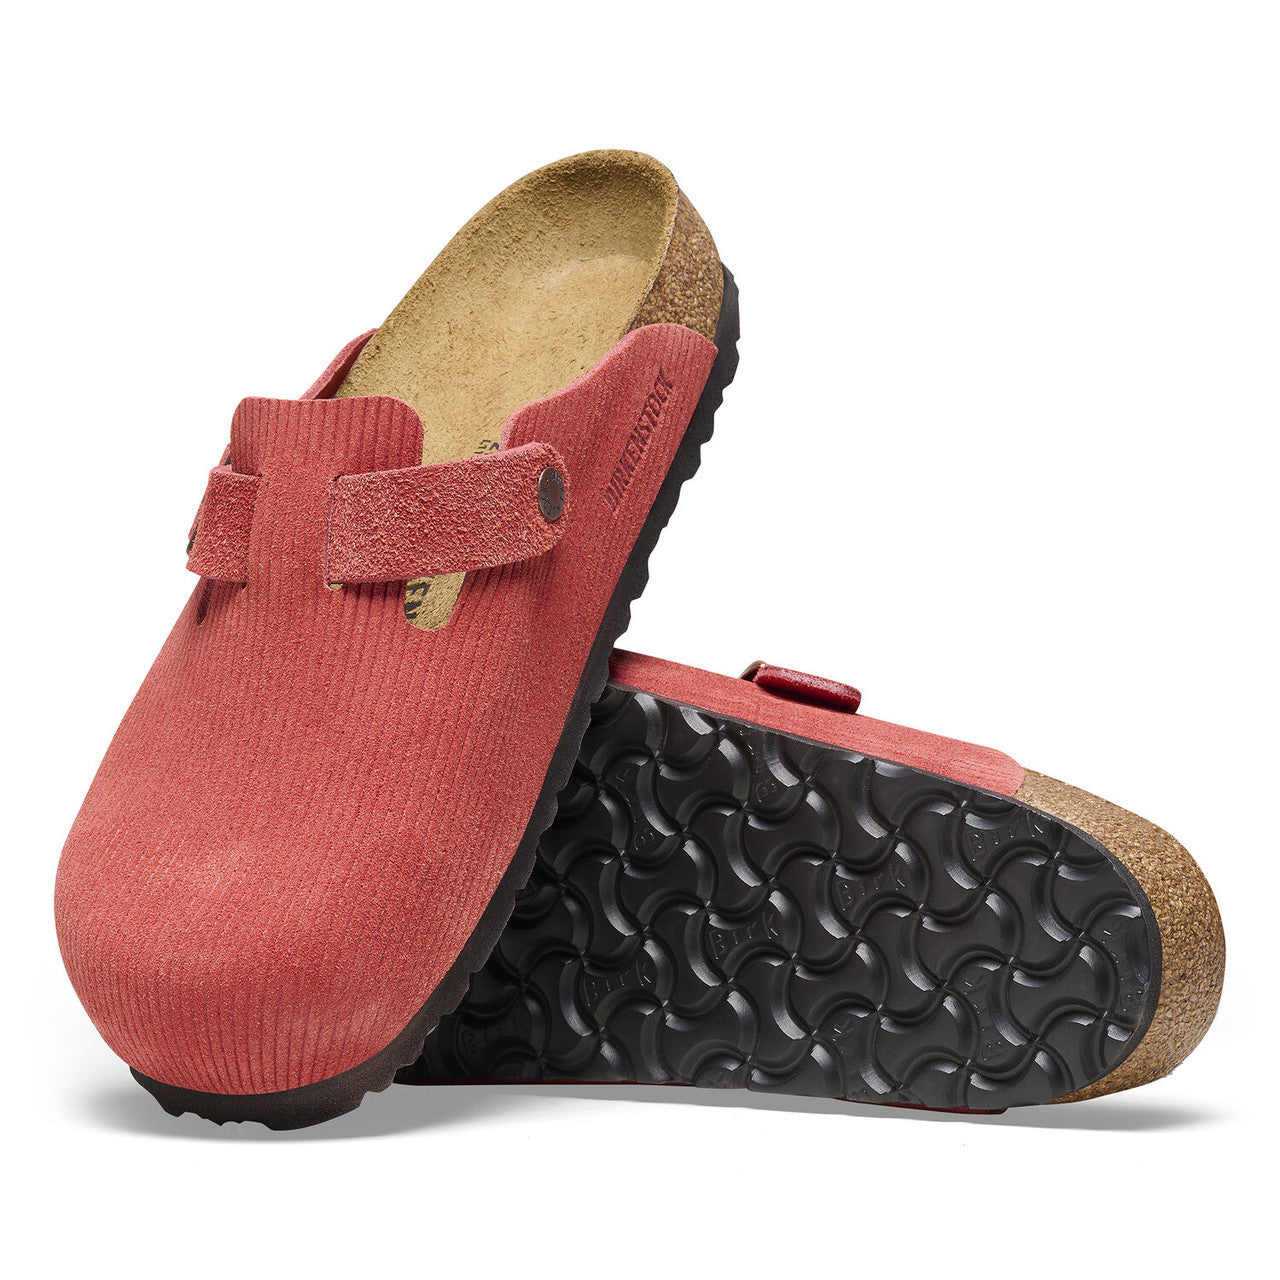 Boston Classic Footbed : Sienna Red Corduroy